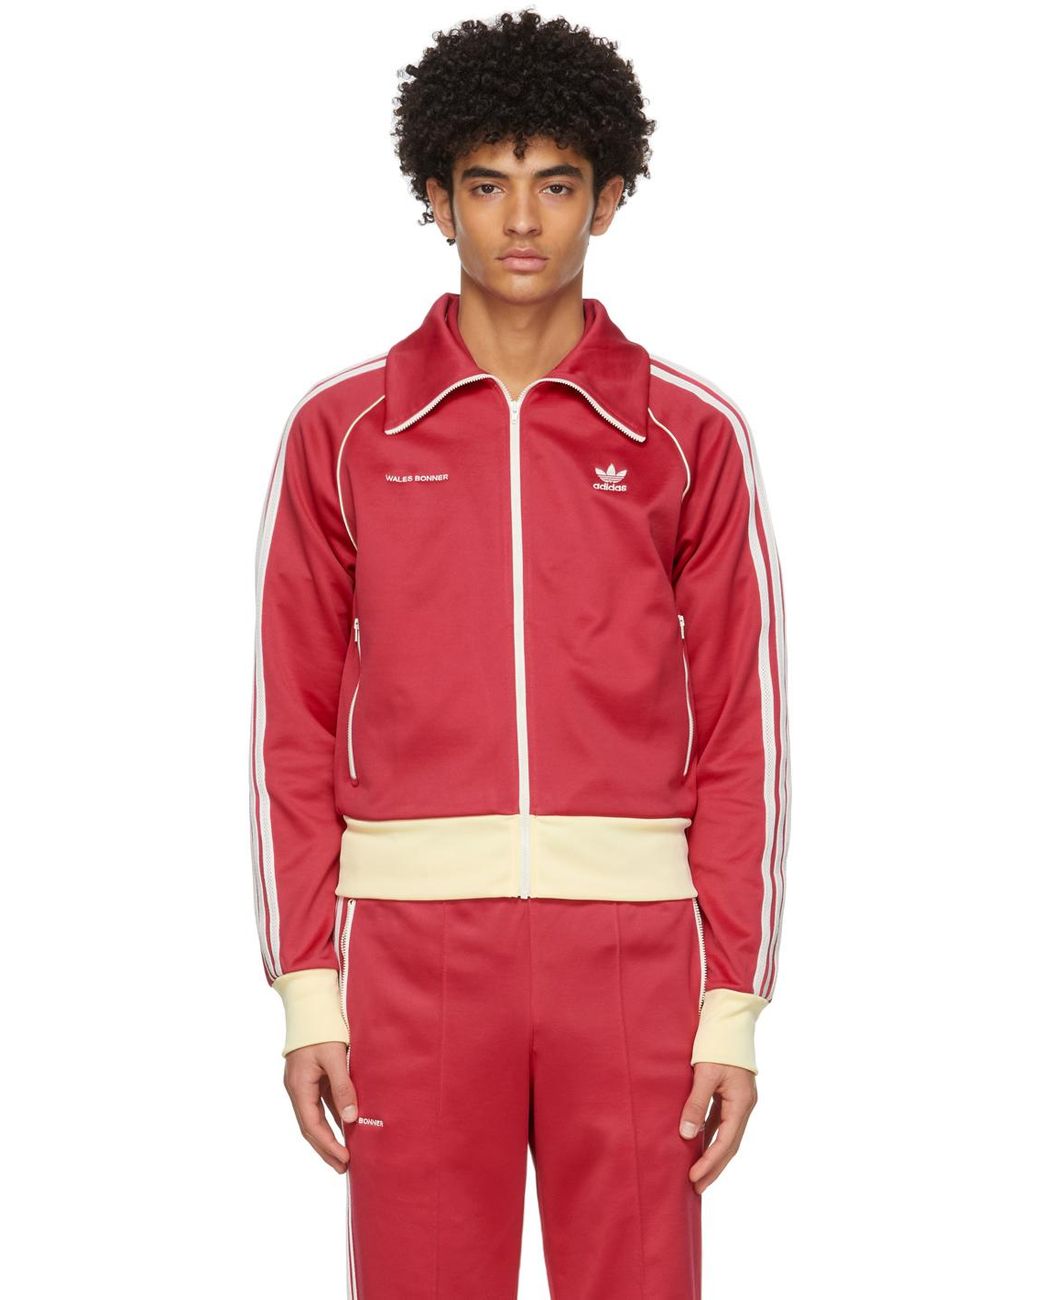 Wales Bonner Cotton Pink Adidas Edition Stripe Track Jacket in Red for Men  | Lyst Australia